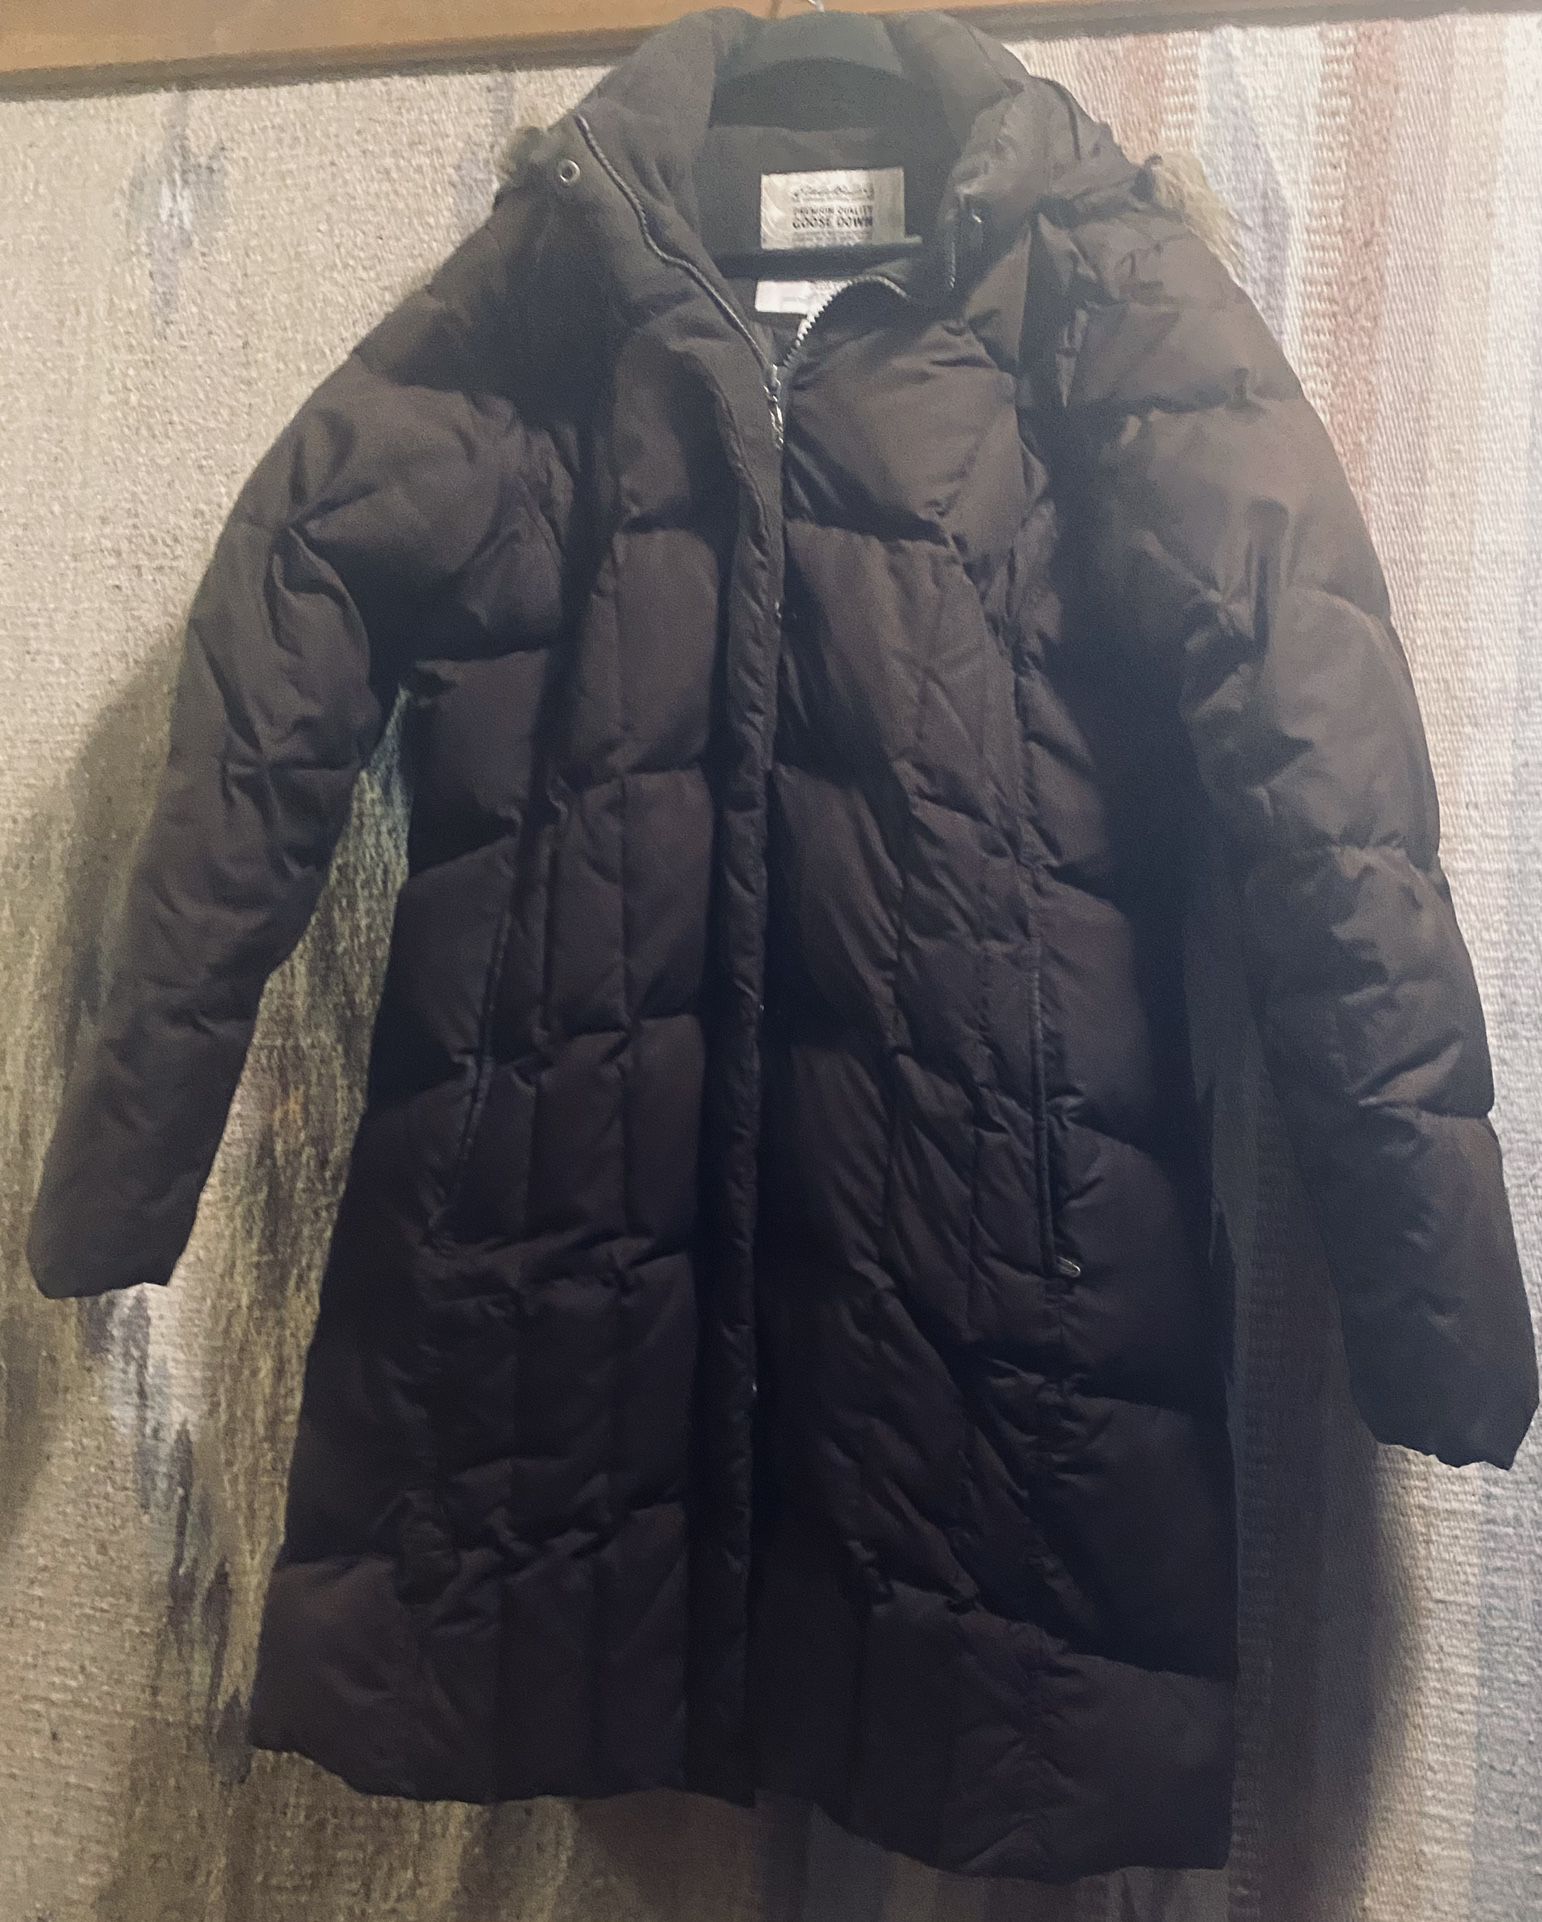 Womens Eddie Bauer 100% GOOSE Down Coat Size Med. Very Light Use.  Chocolate Brown.  700 FILLPOWER